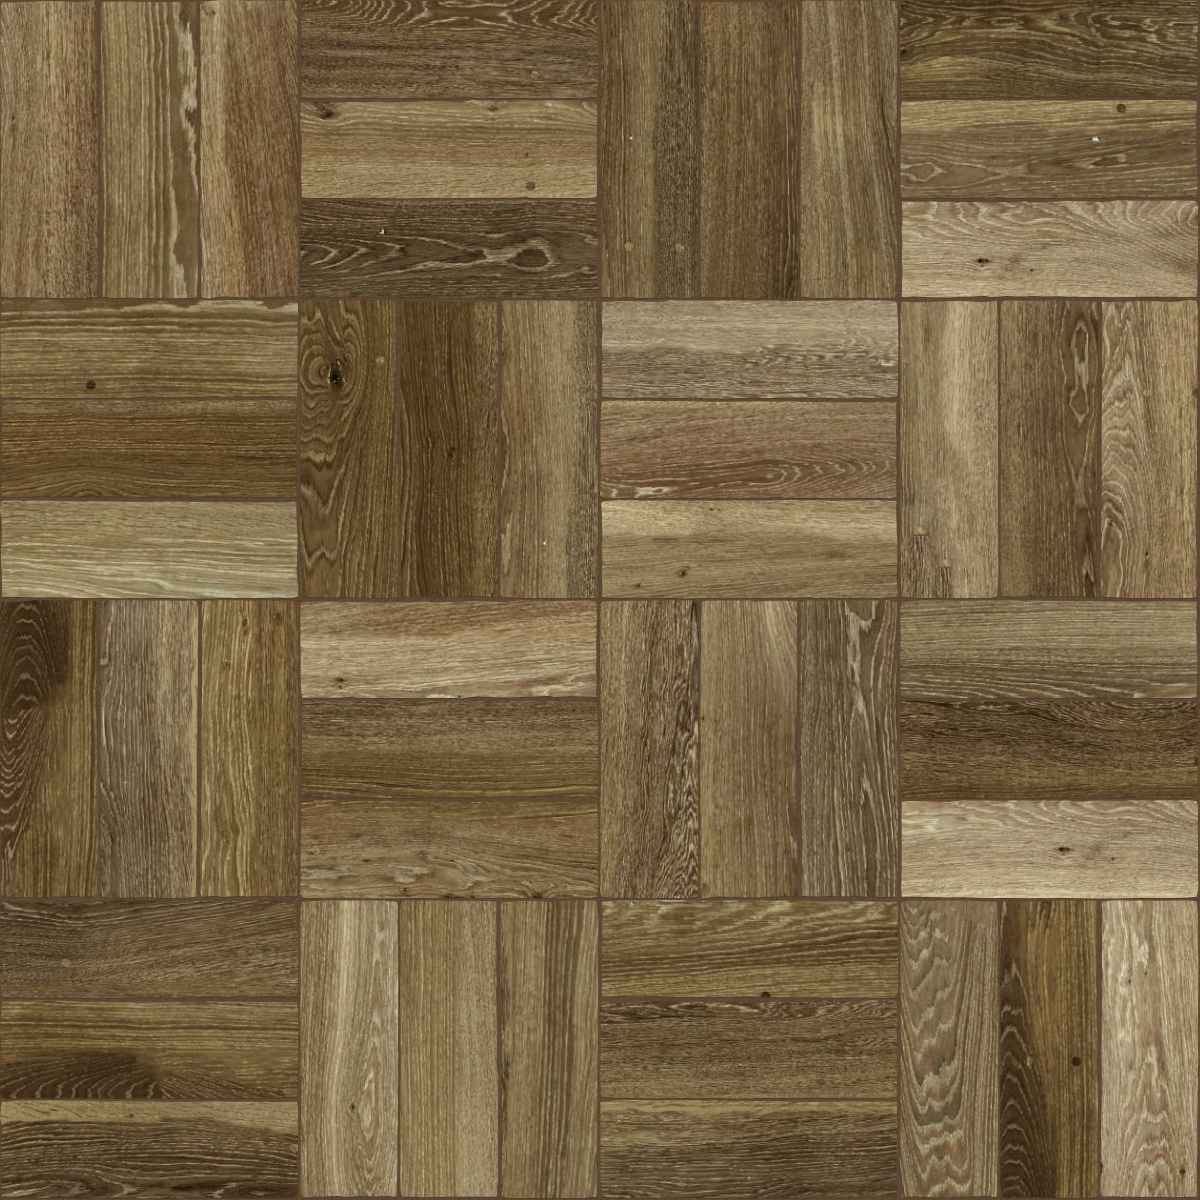 A seamless wood texture with stained timber boards arranged in a Basketweave pattern